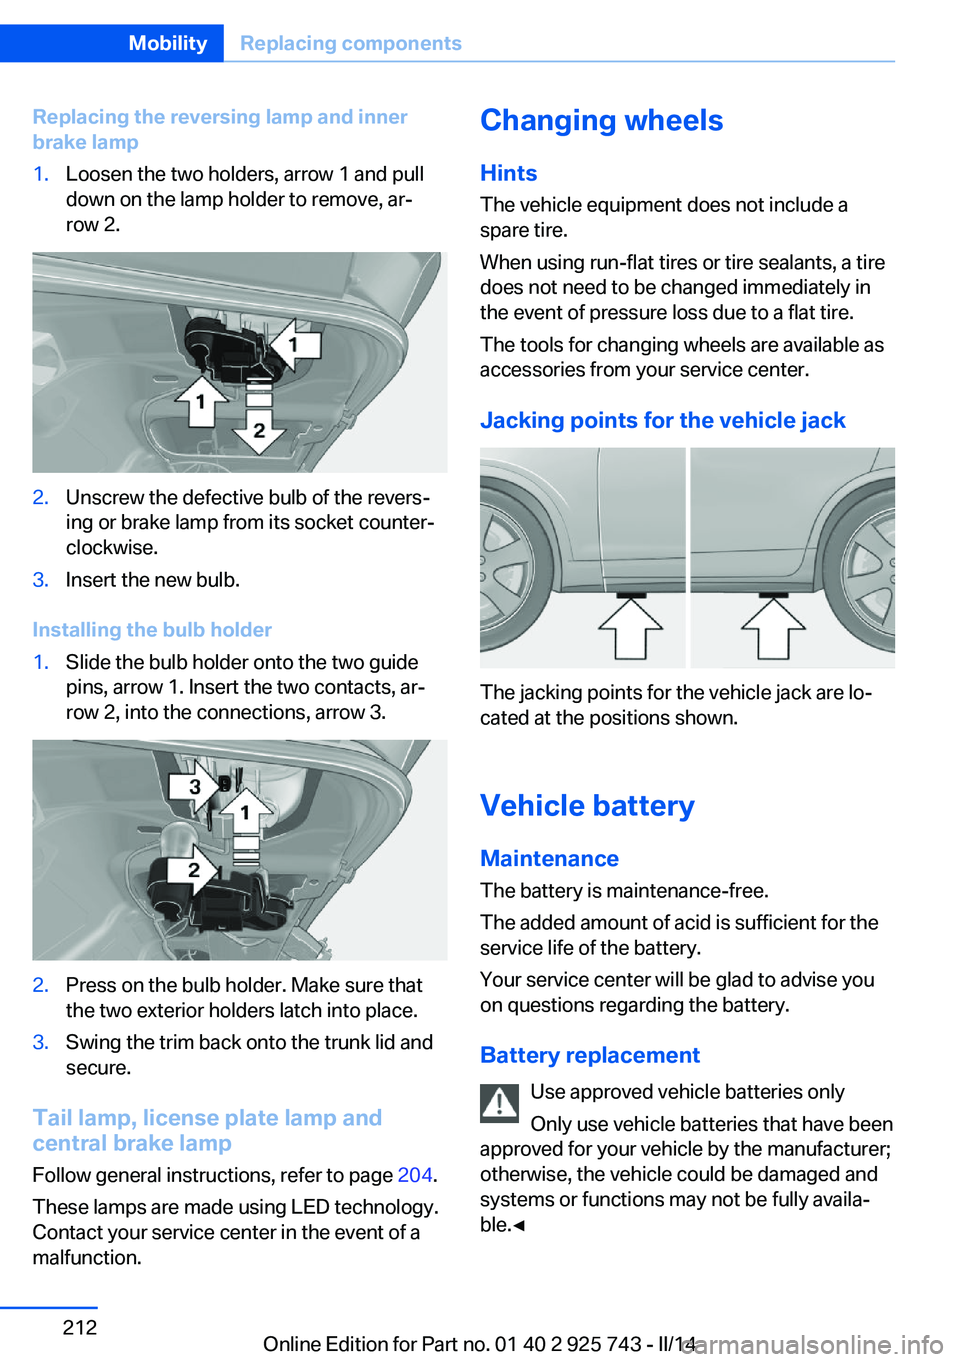 BMW 320I 2014  Owners Manual Replacing the reversing lamp and inner
brake lamp1.Loosen the two holders, arrow 1 and pull
down on the lamp holder to remove, ar‐
row 2.2.Unscrew the defective bulb of the revers‐
ing or brake la